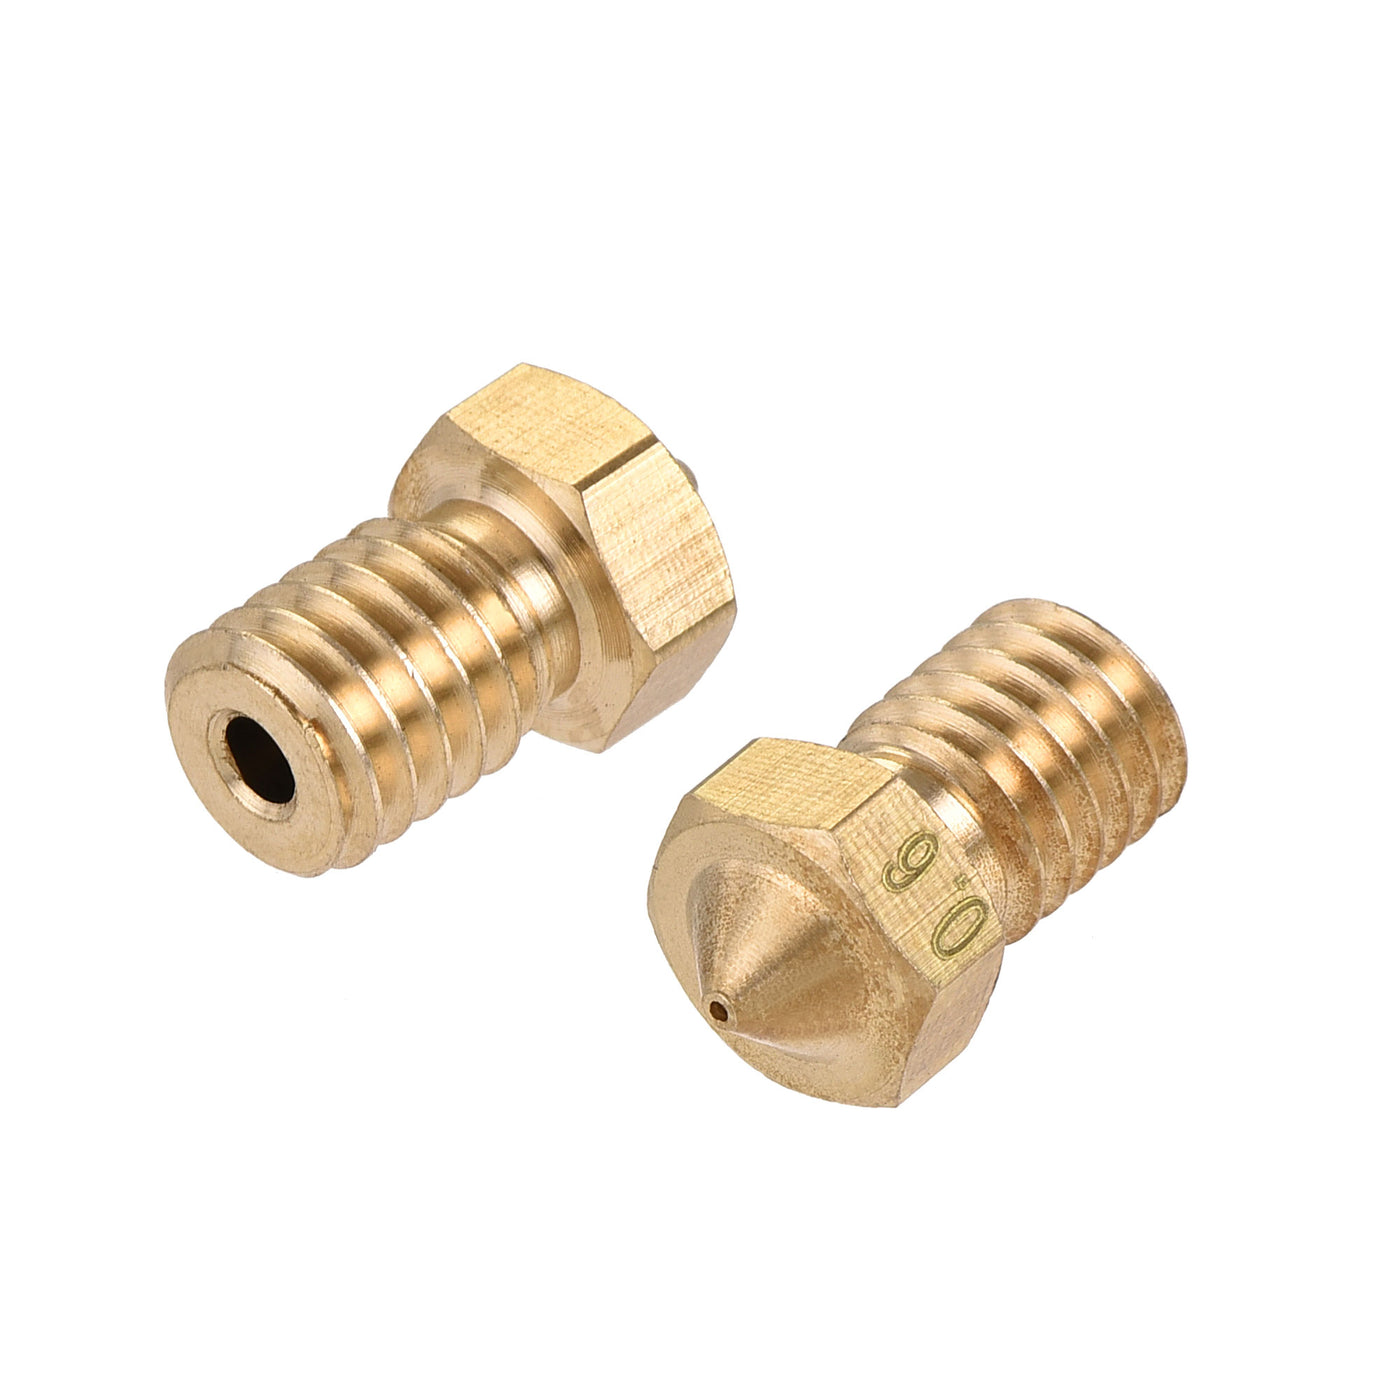 uxcell Uxcell 0.6mm 3D Printer Nozzle, 14pcs M6 Thread for V5 V6 1.75mm Extruder Print, Brass